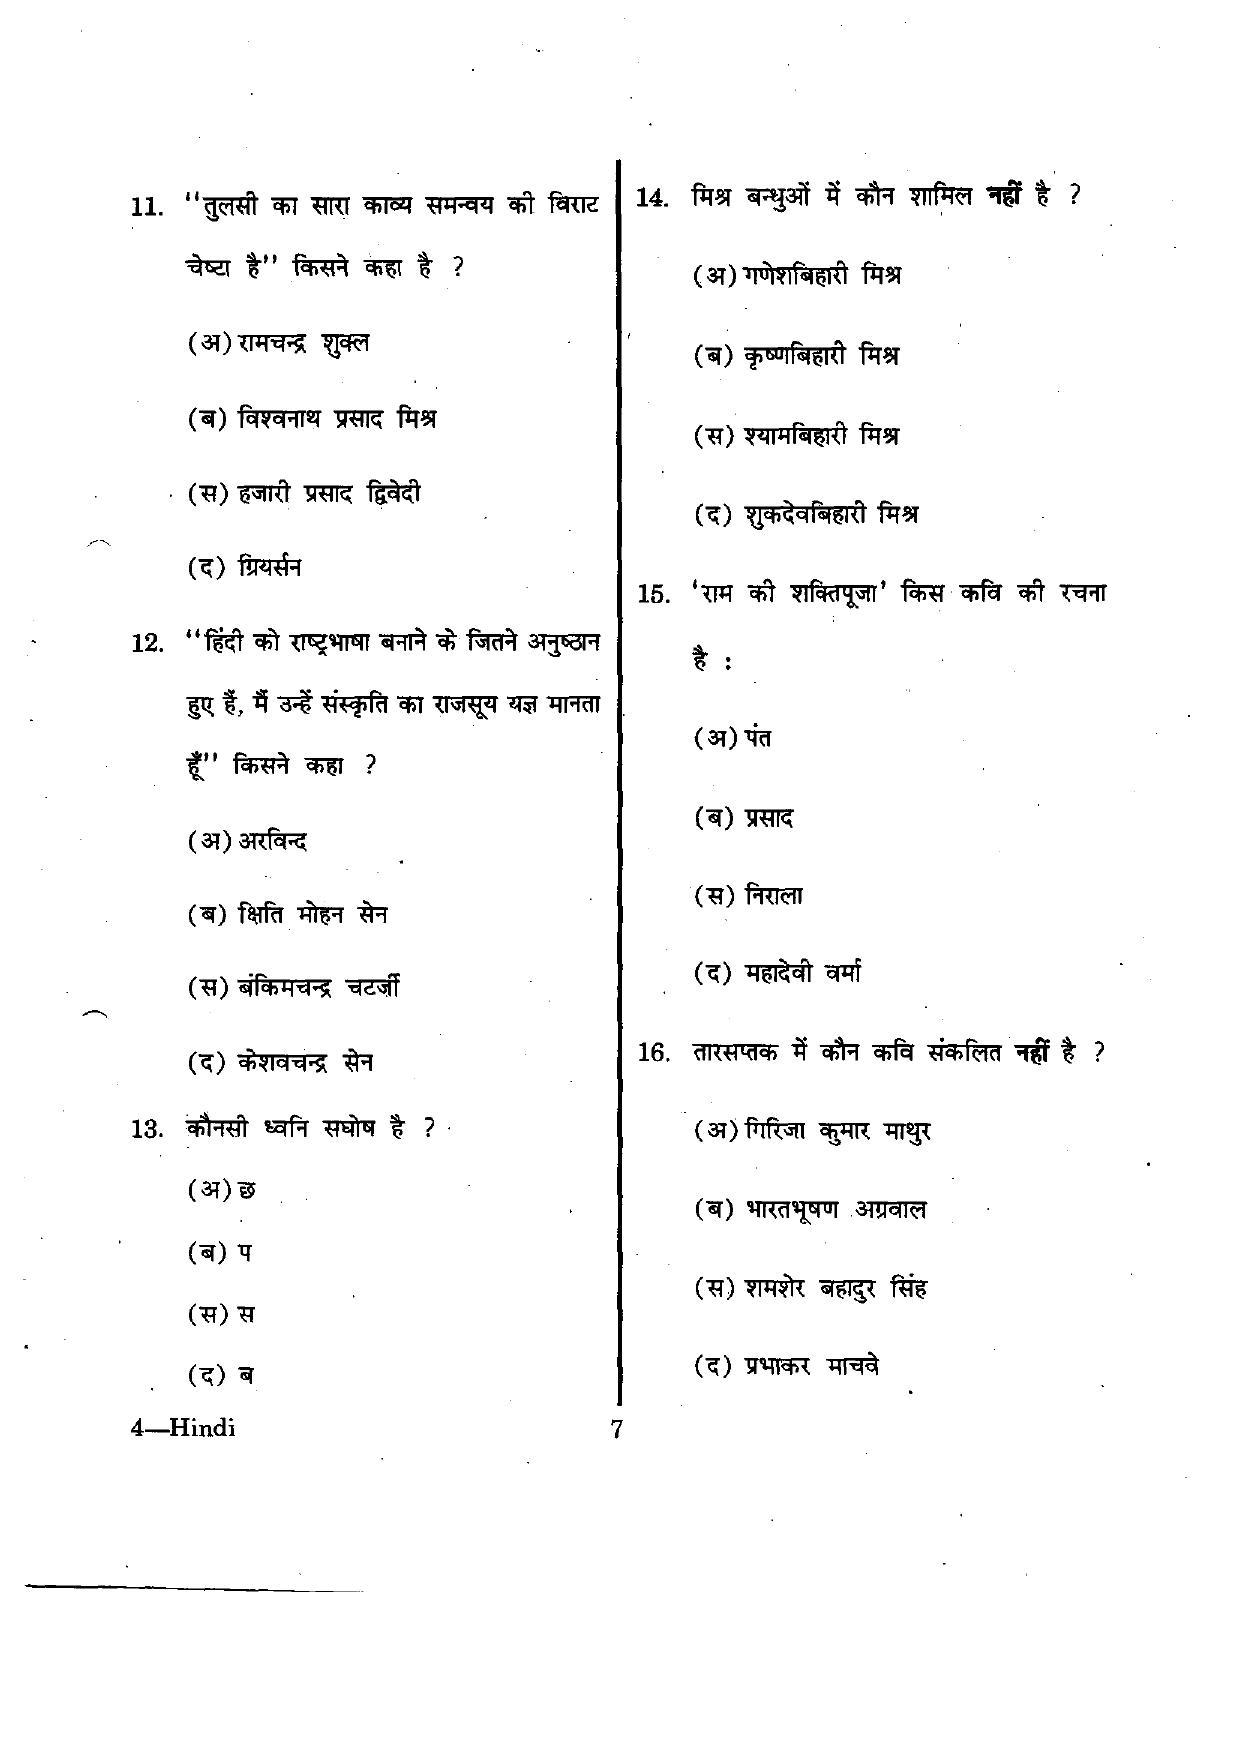 URATPG Hindi 2012 Question Paper - Page 7